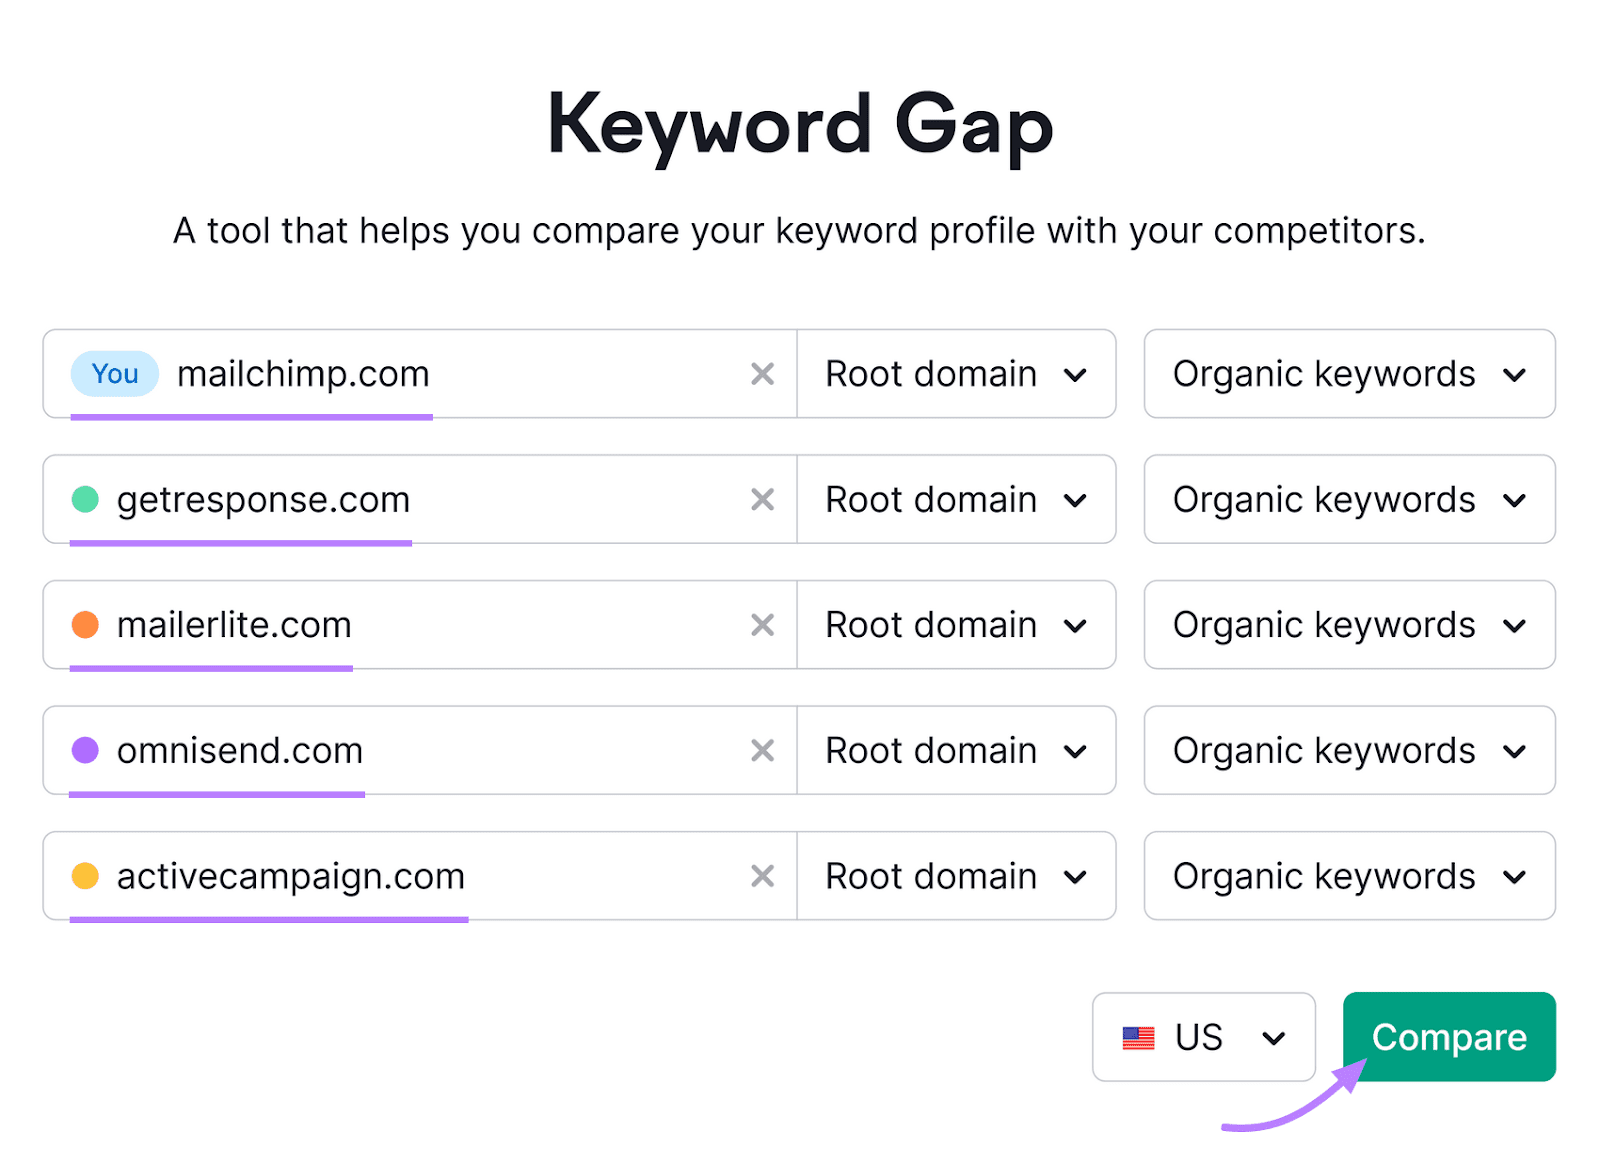 Keyword Gap tool showing “mailchimp.com” and various competitors entered in the domain bars.